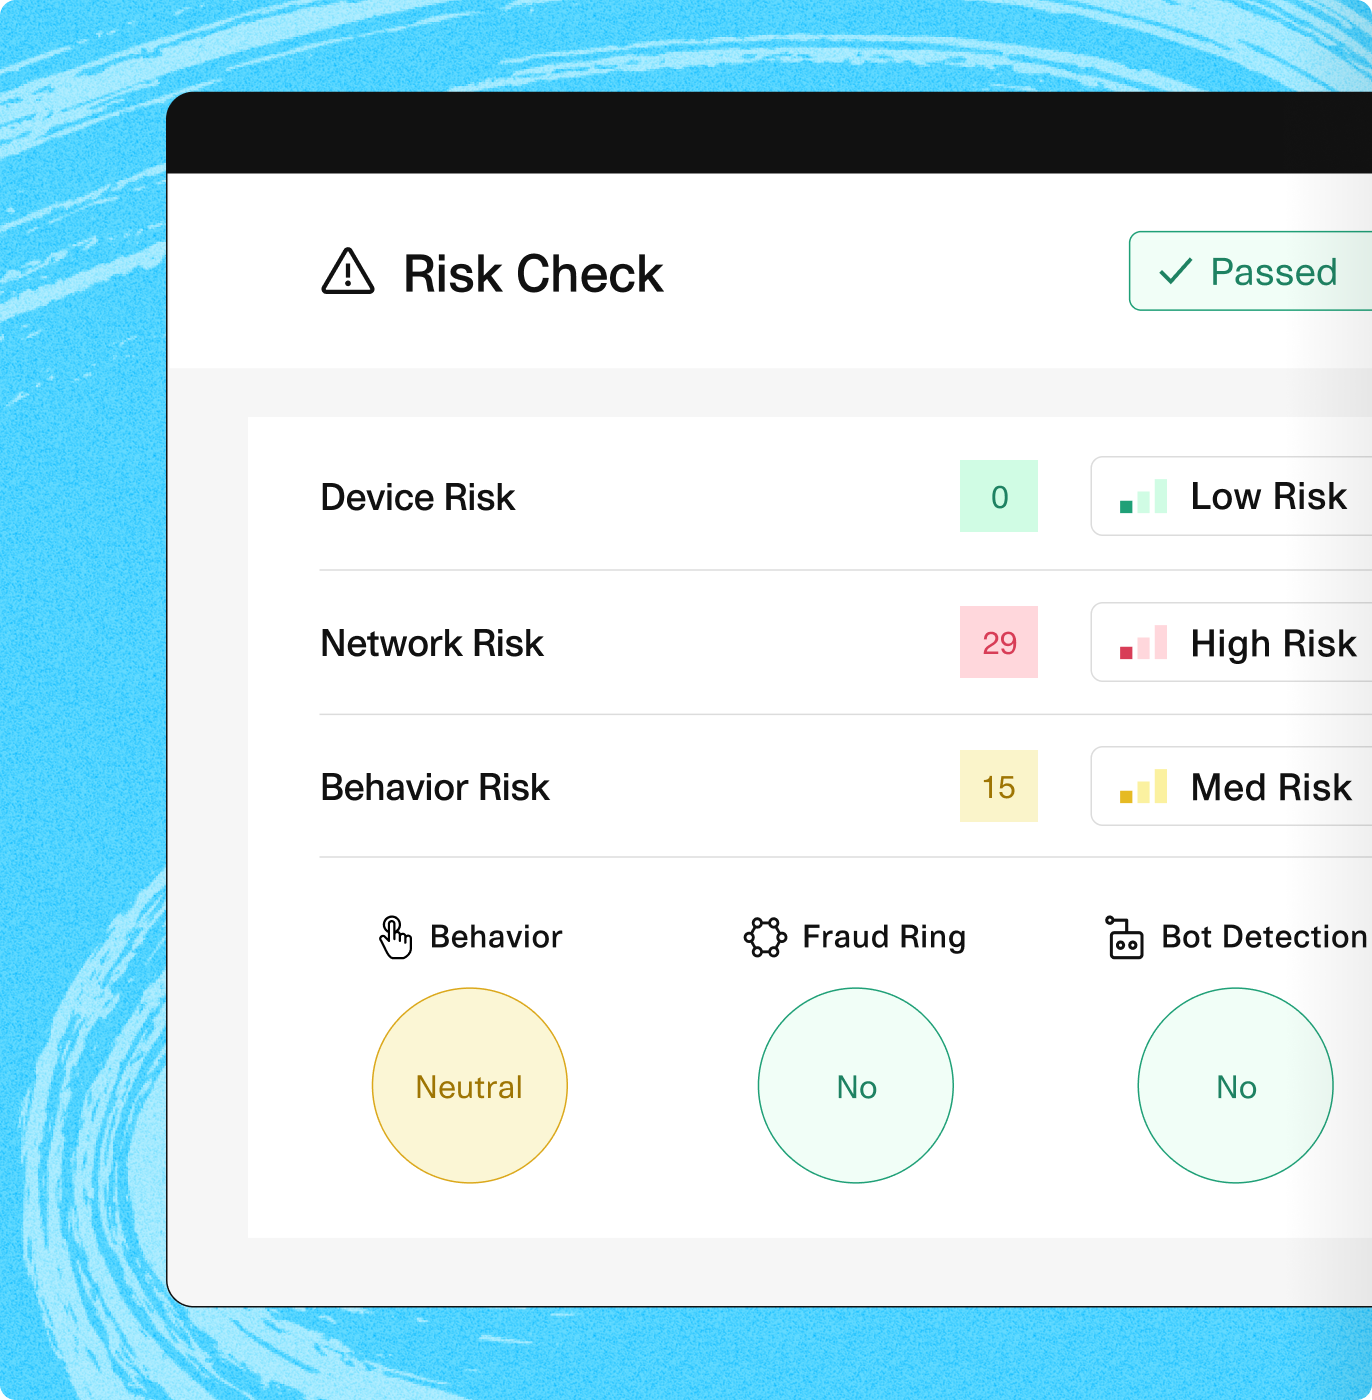 Screen showing a passing risk check, with risk levels for device (low), network (high) and behavior (medium)